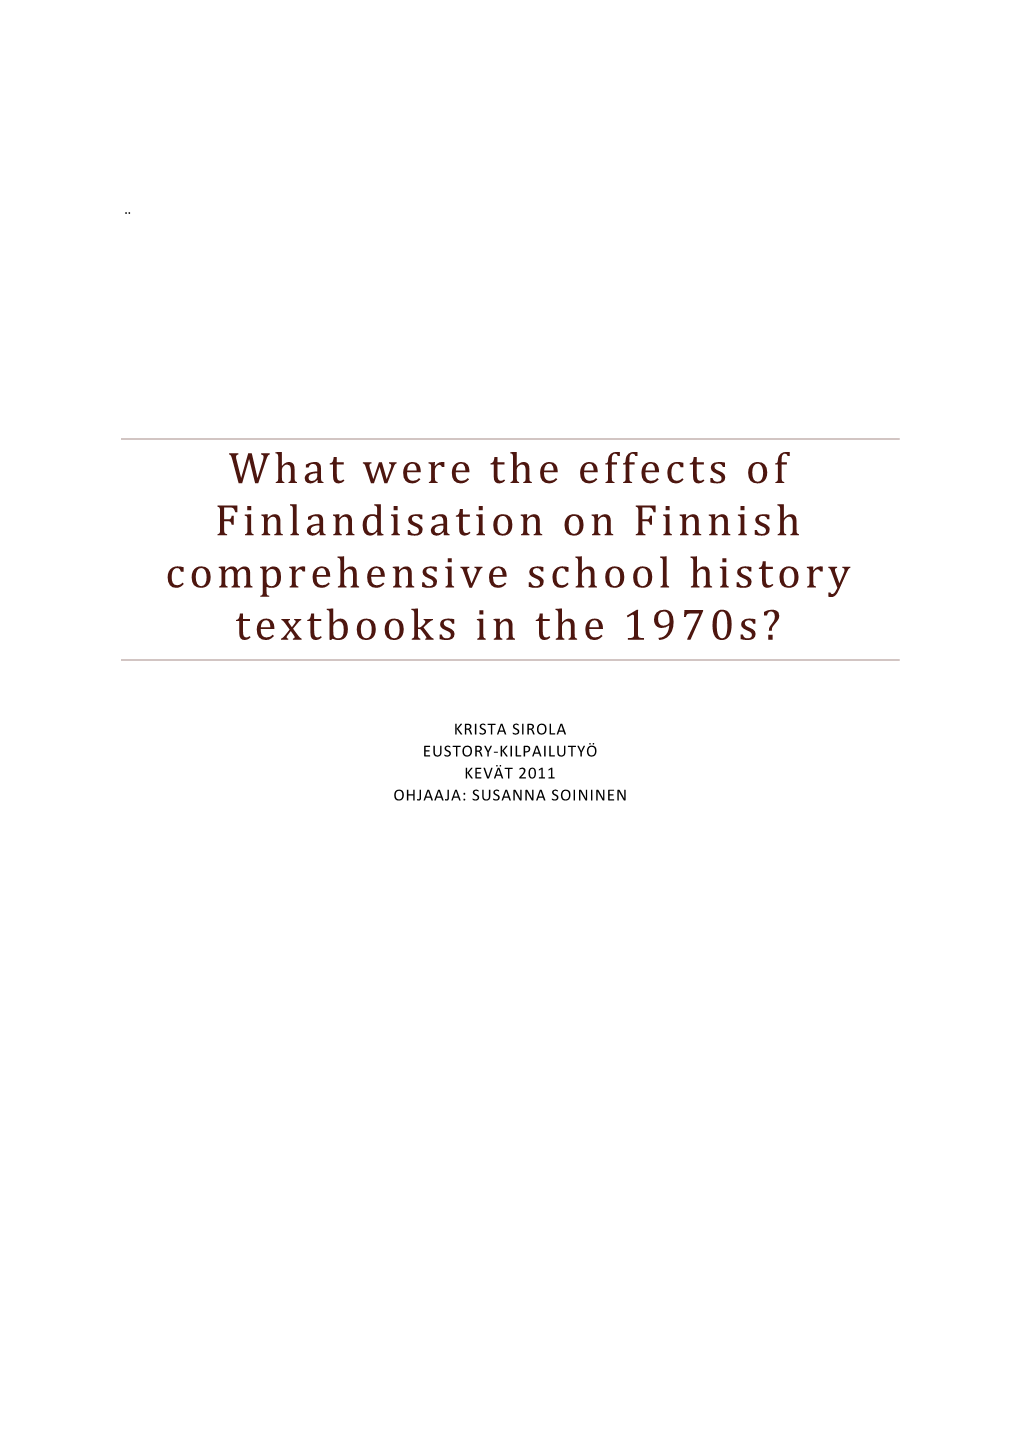 What Were the Effects of Finlandisation on Finnish Comprehensive School History Textbooks in the 1970S?